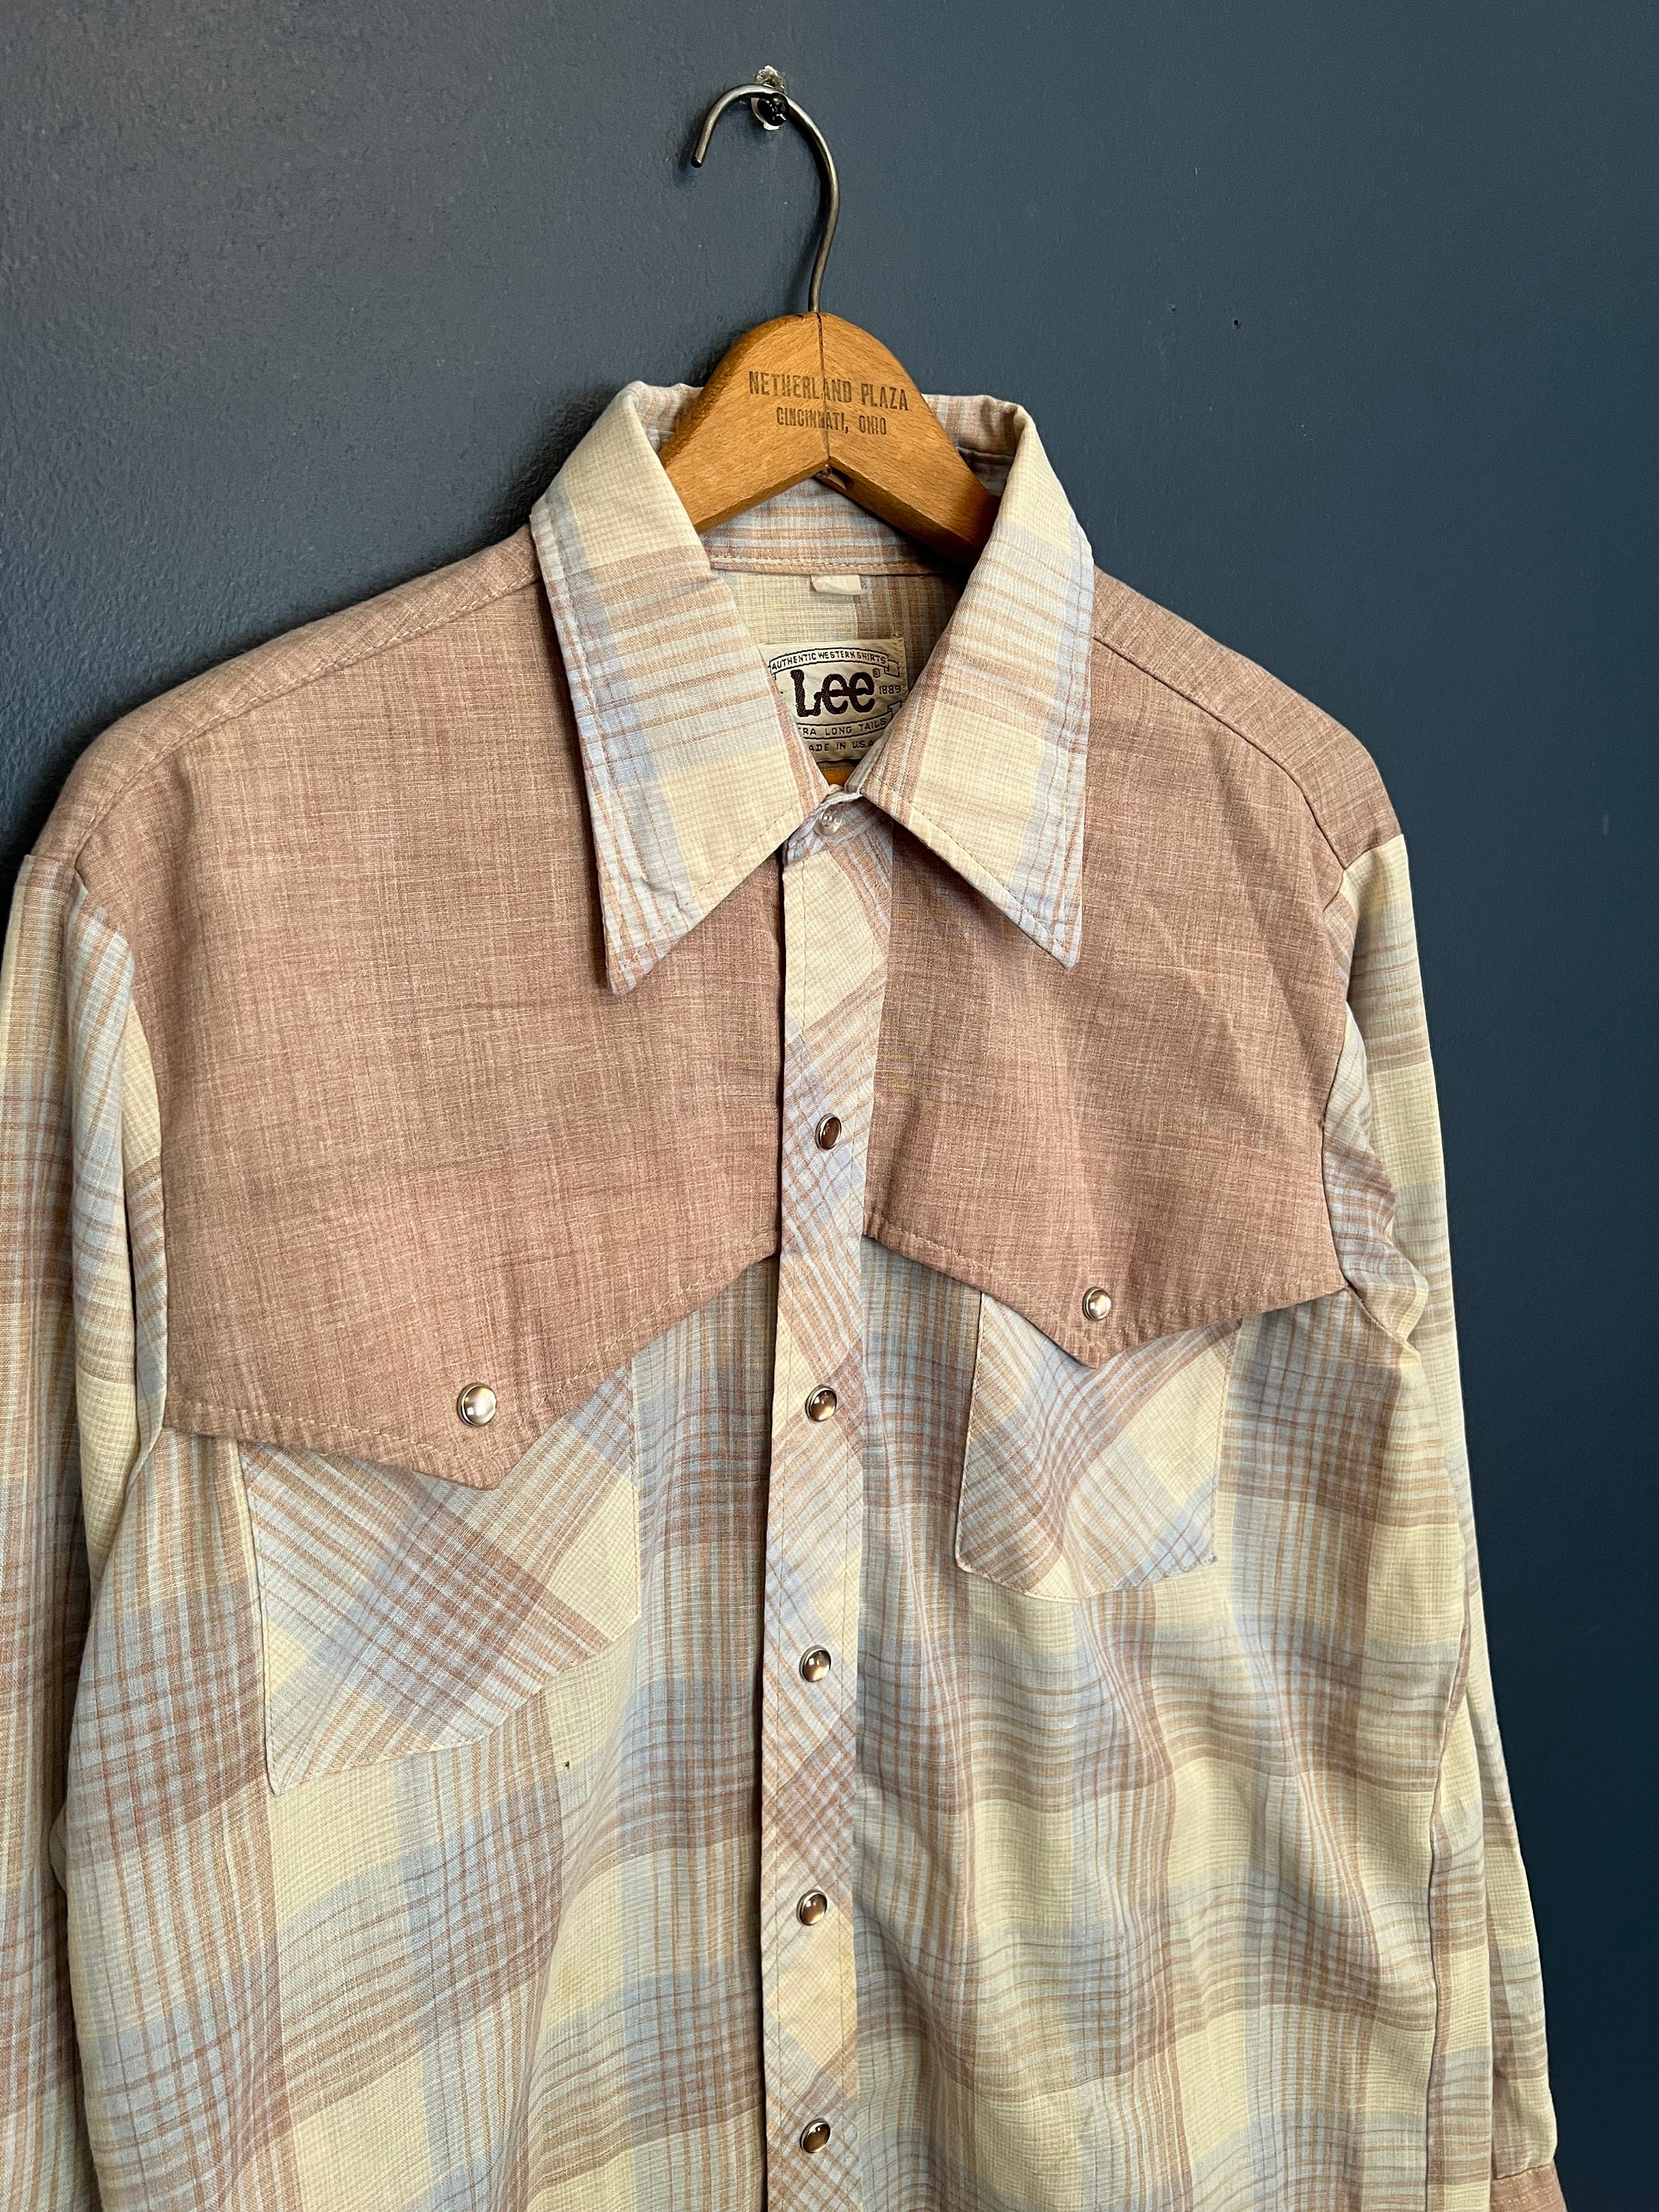 Removing Pearl Snaps to Upcycle a Man's Western Shirt – Fruit From My Hands